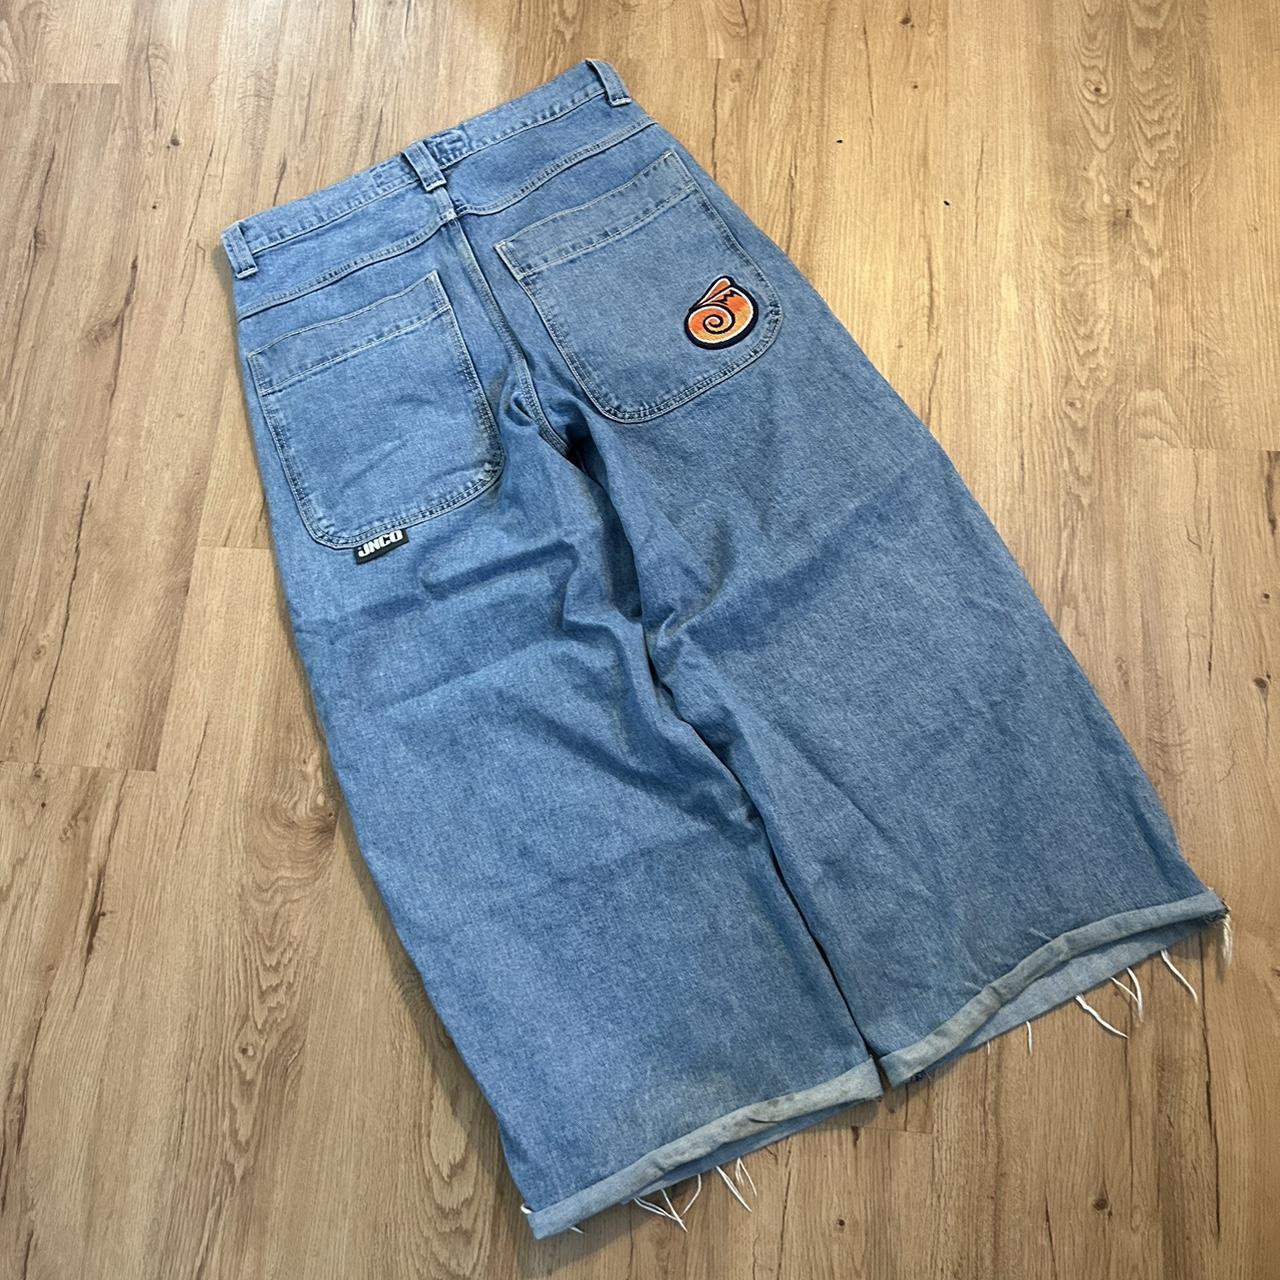 jnco jeans vintage twin cannon 26’ - (NFS DO NOT... - Depop